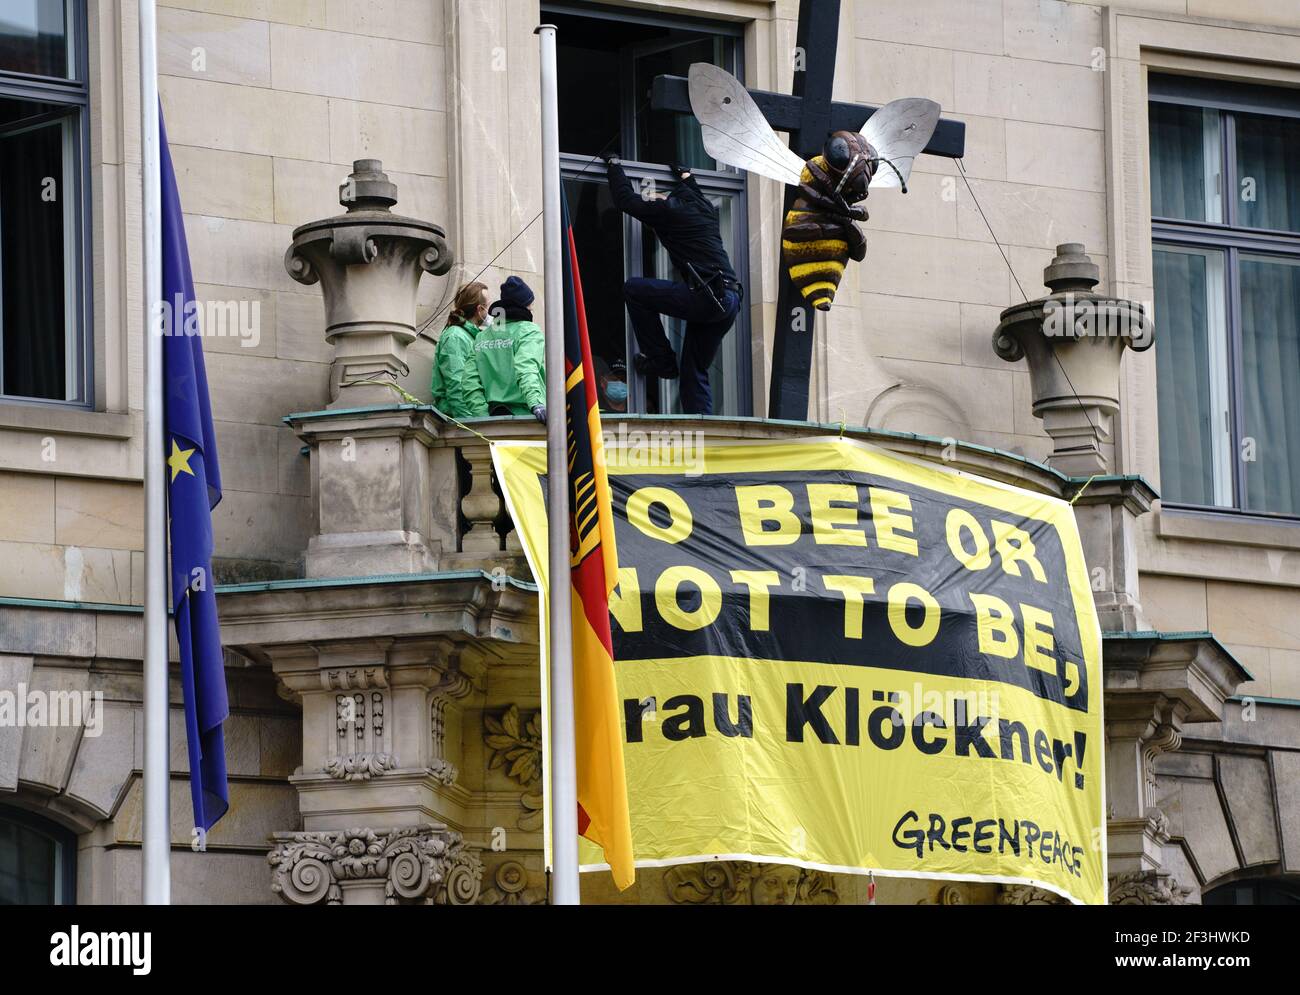 Berlin, Germany. 17th Mar, 2021. Greenpeace activists display a poster with the play on words 'To bee or not to be, Frau Klöckner' in front of their sculpture of a bee on a cross on the balcony of the Federal Ministry of Agriculture, while a police officer climbs through an upper window. With the action, the environmentalists protest for the preservation of diversity in the fields and demand more funding for species protection. Credit: Kay Nietfeld/dpa/Alamy Live News Stock Photo